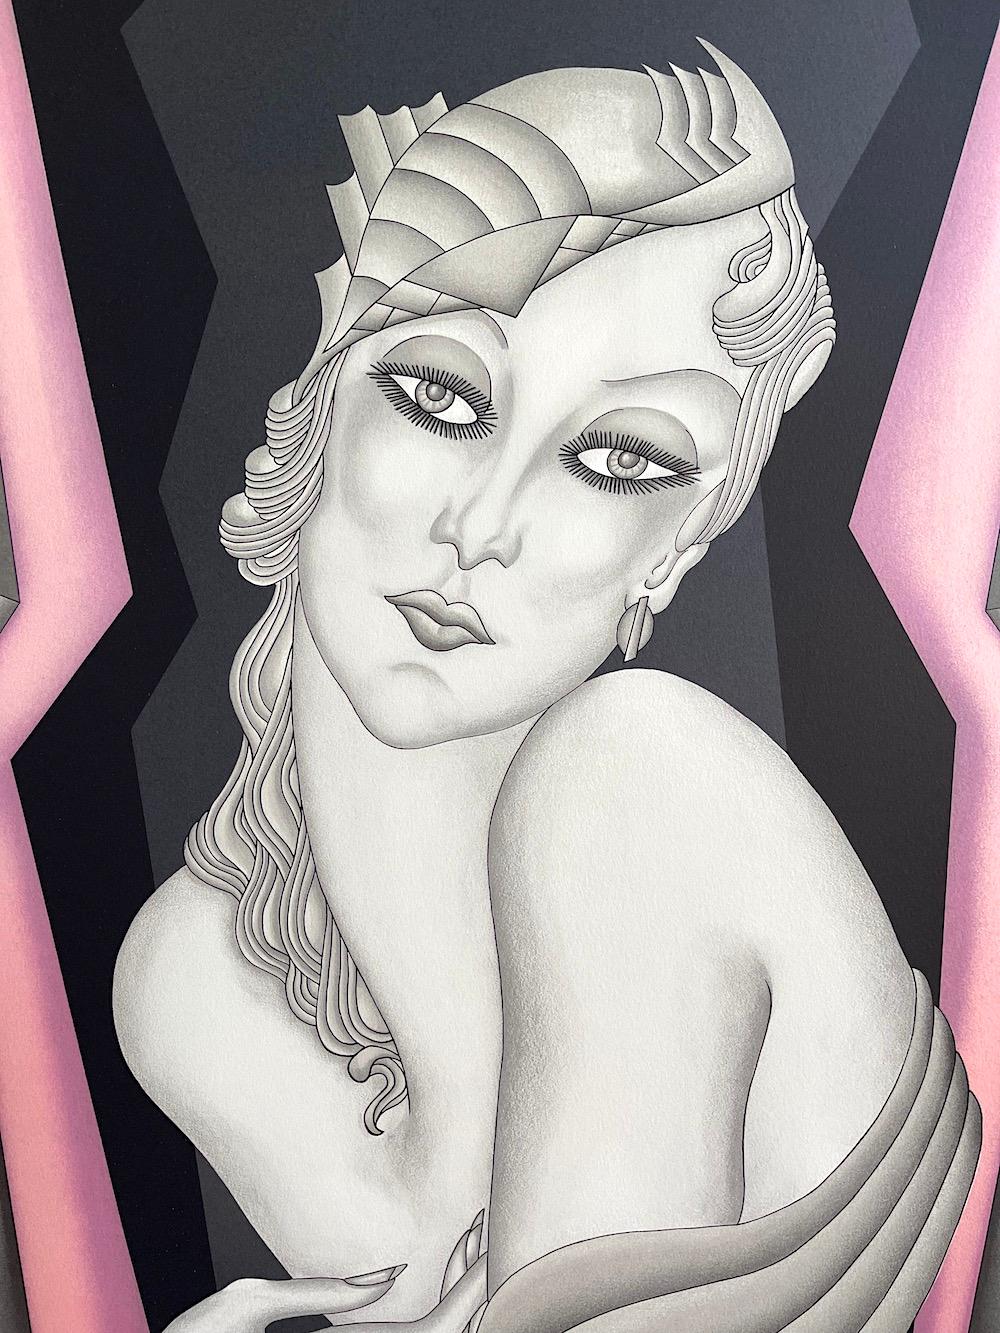 GATSBY GIRL Lithograph, Glamour Boudoir Portrait Art Deco Style Pink Black Gray - Print by Unknown